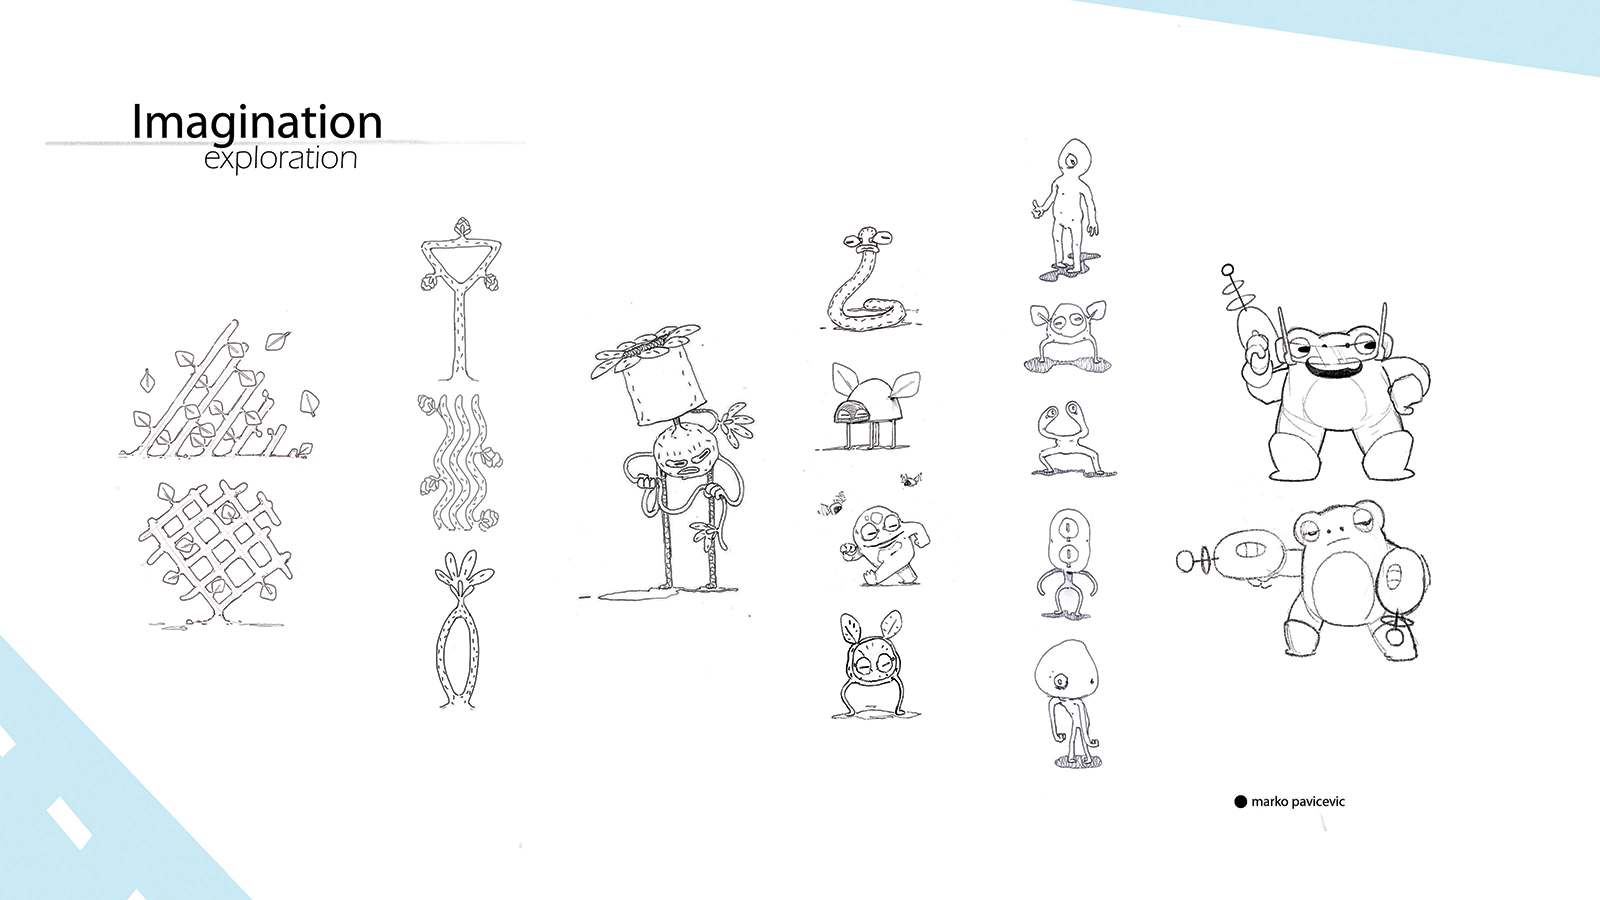 Concepts and sketches for imaginary creatures in Flap.